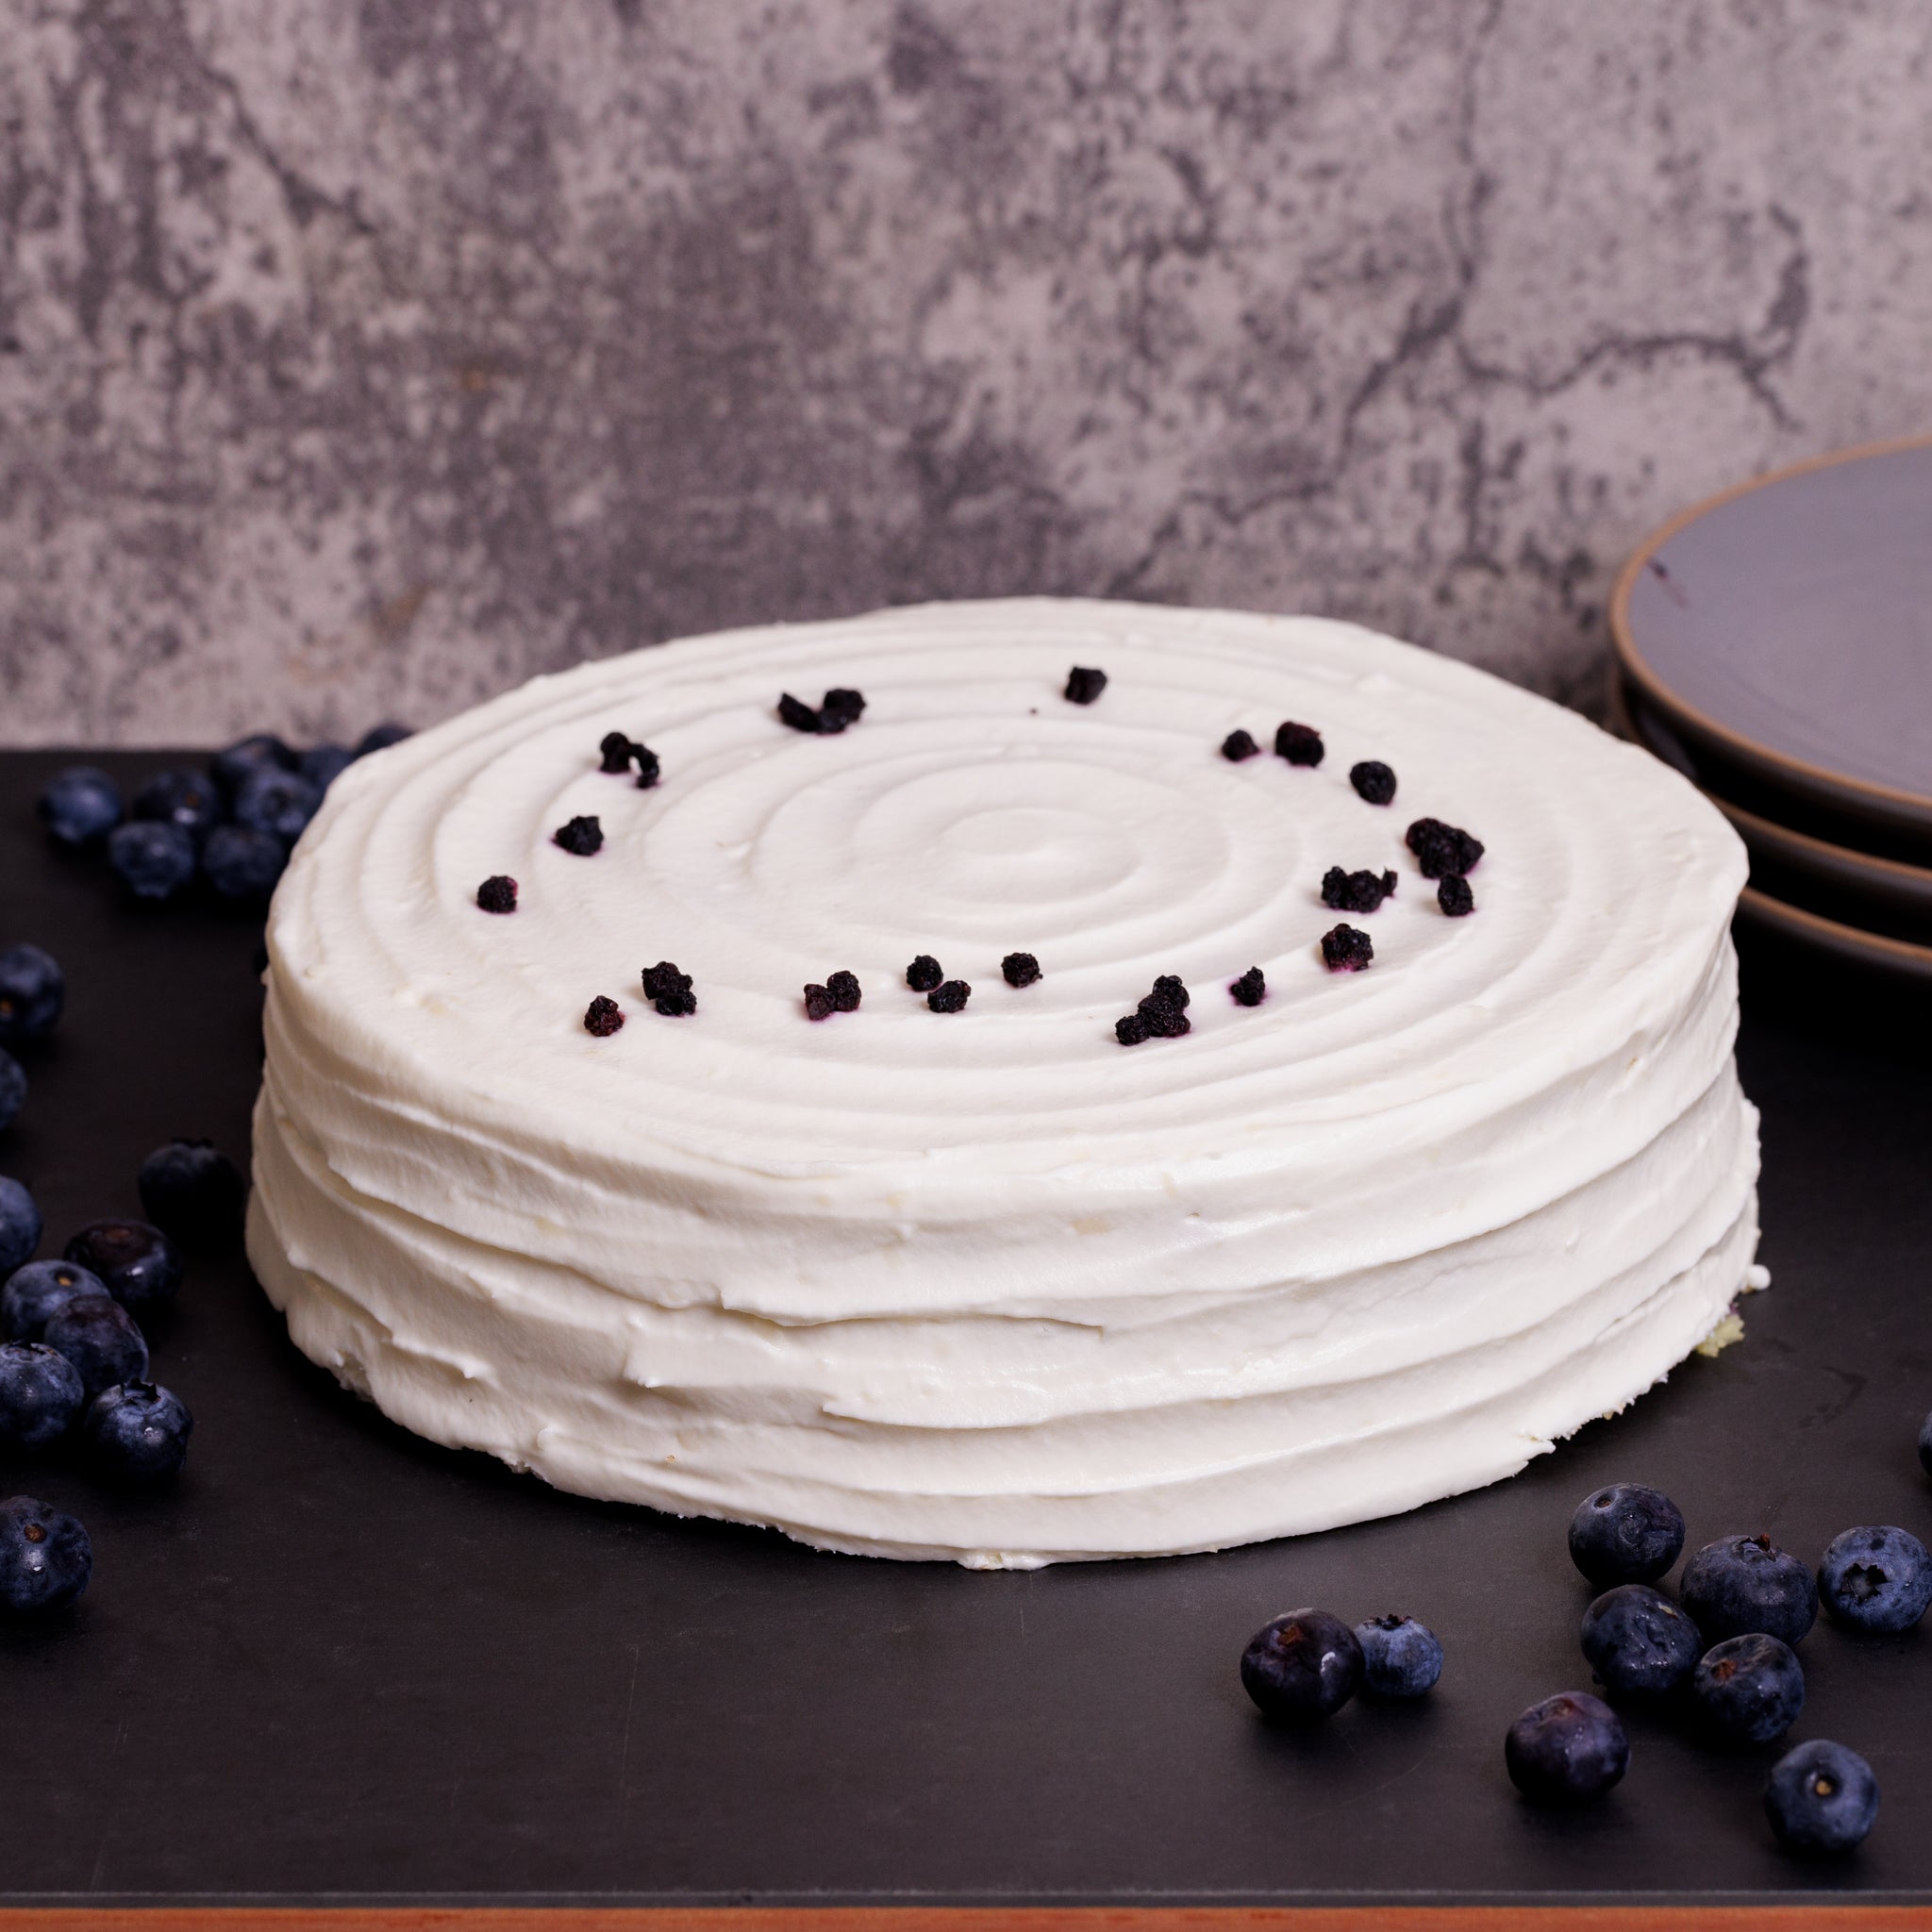 Lemon Blueberry Cheesecake! 3 Rich Unforgettable Layers